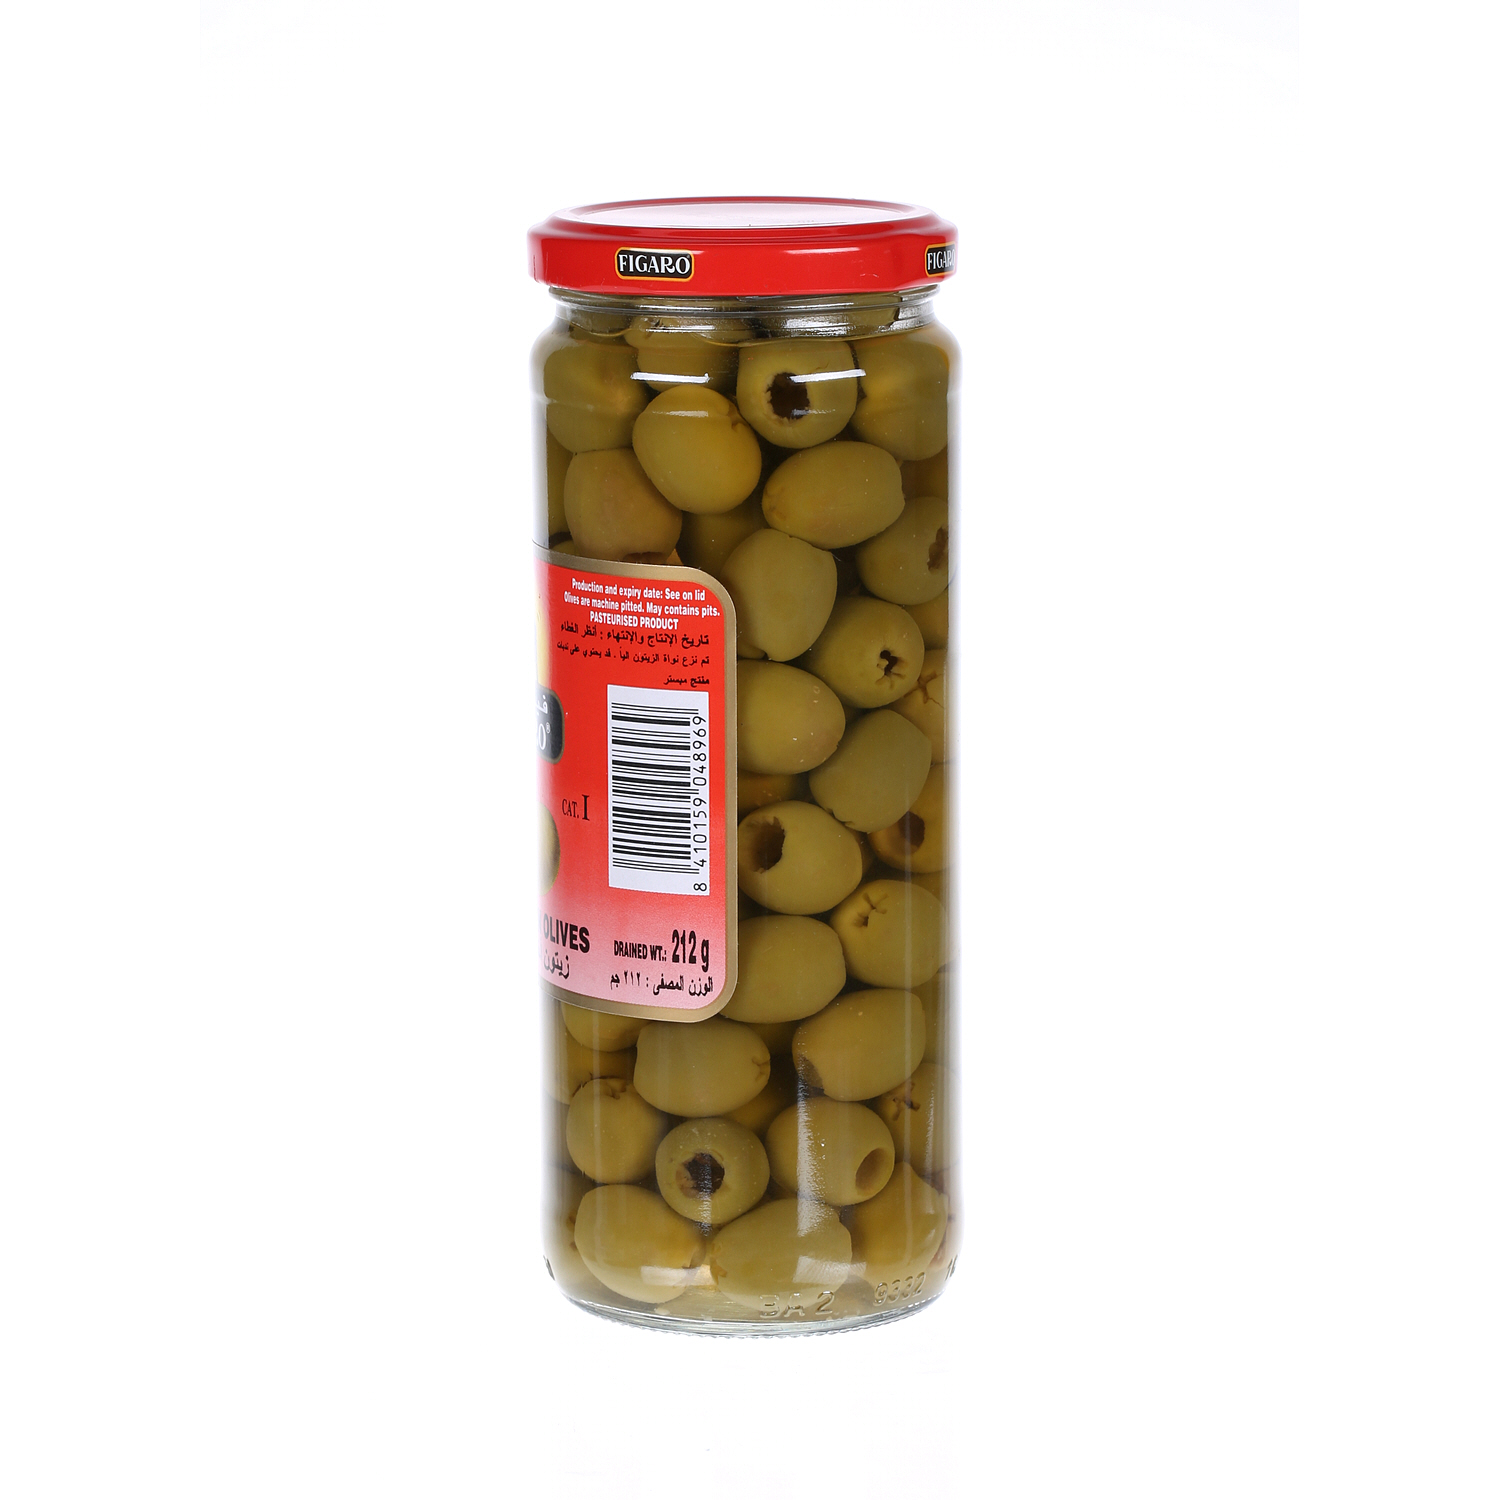 Figaro Pitted Green Olive 454 g